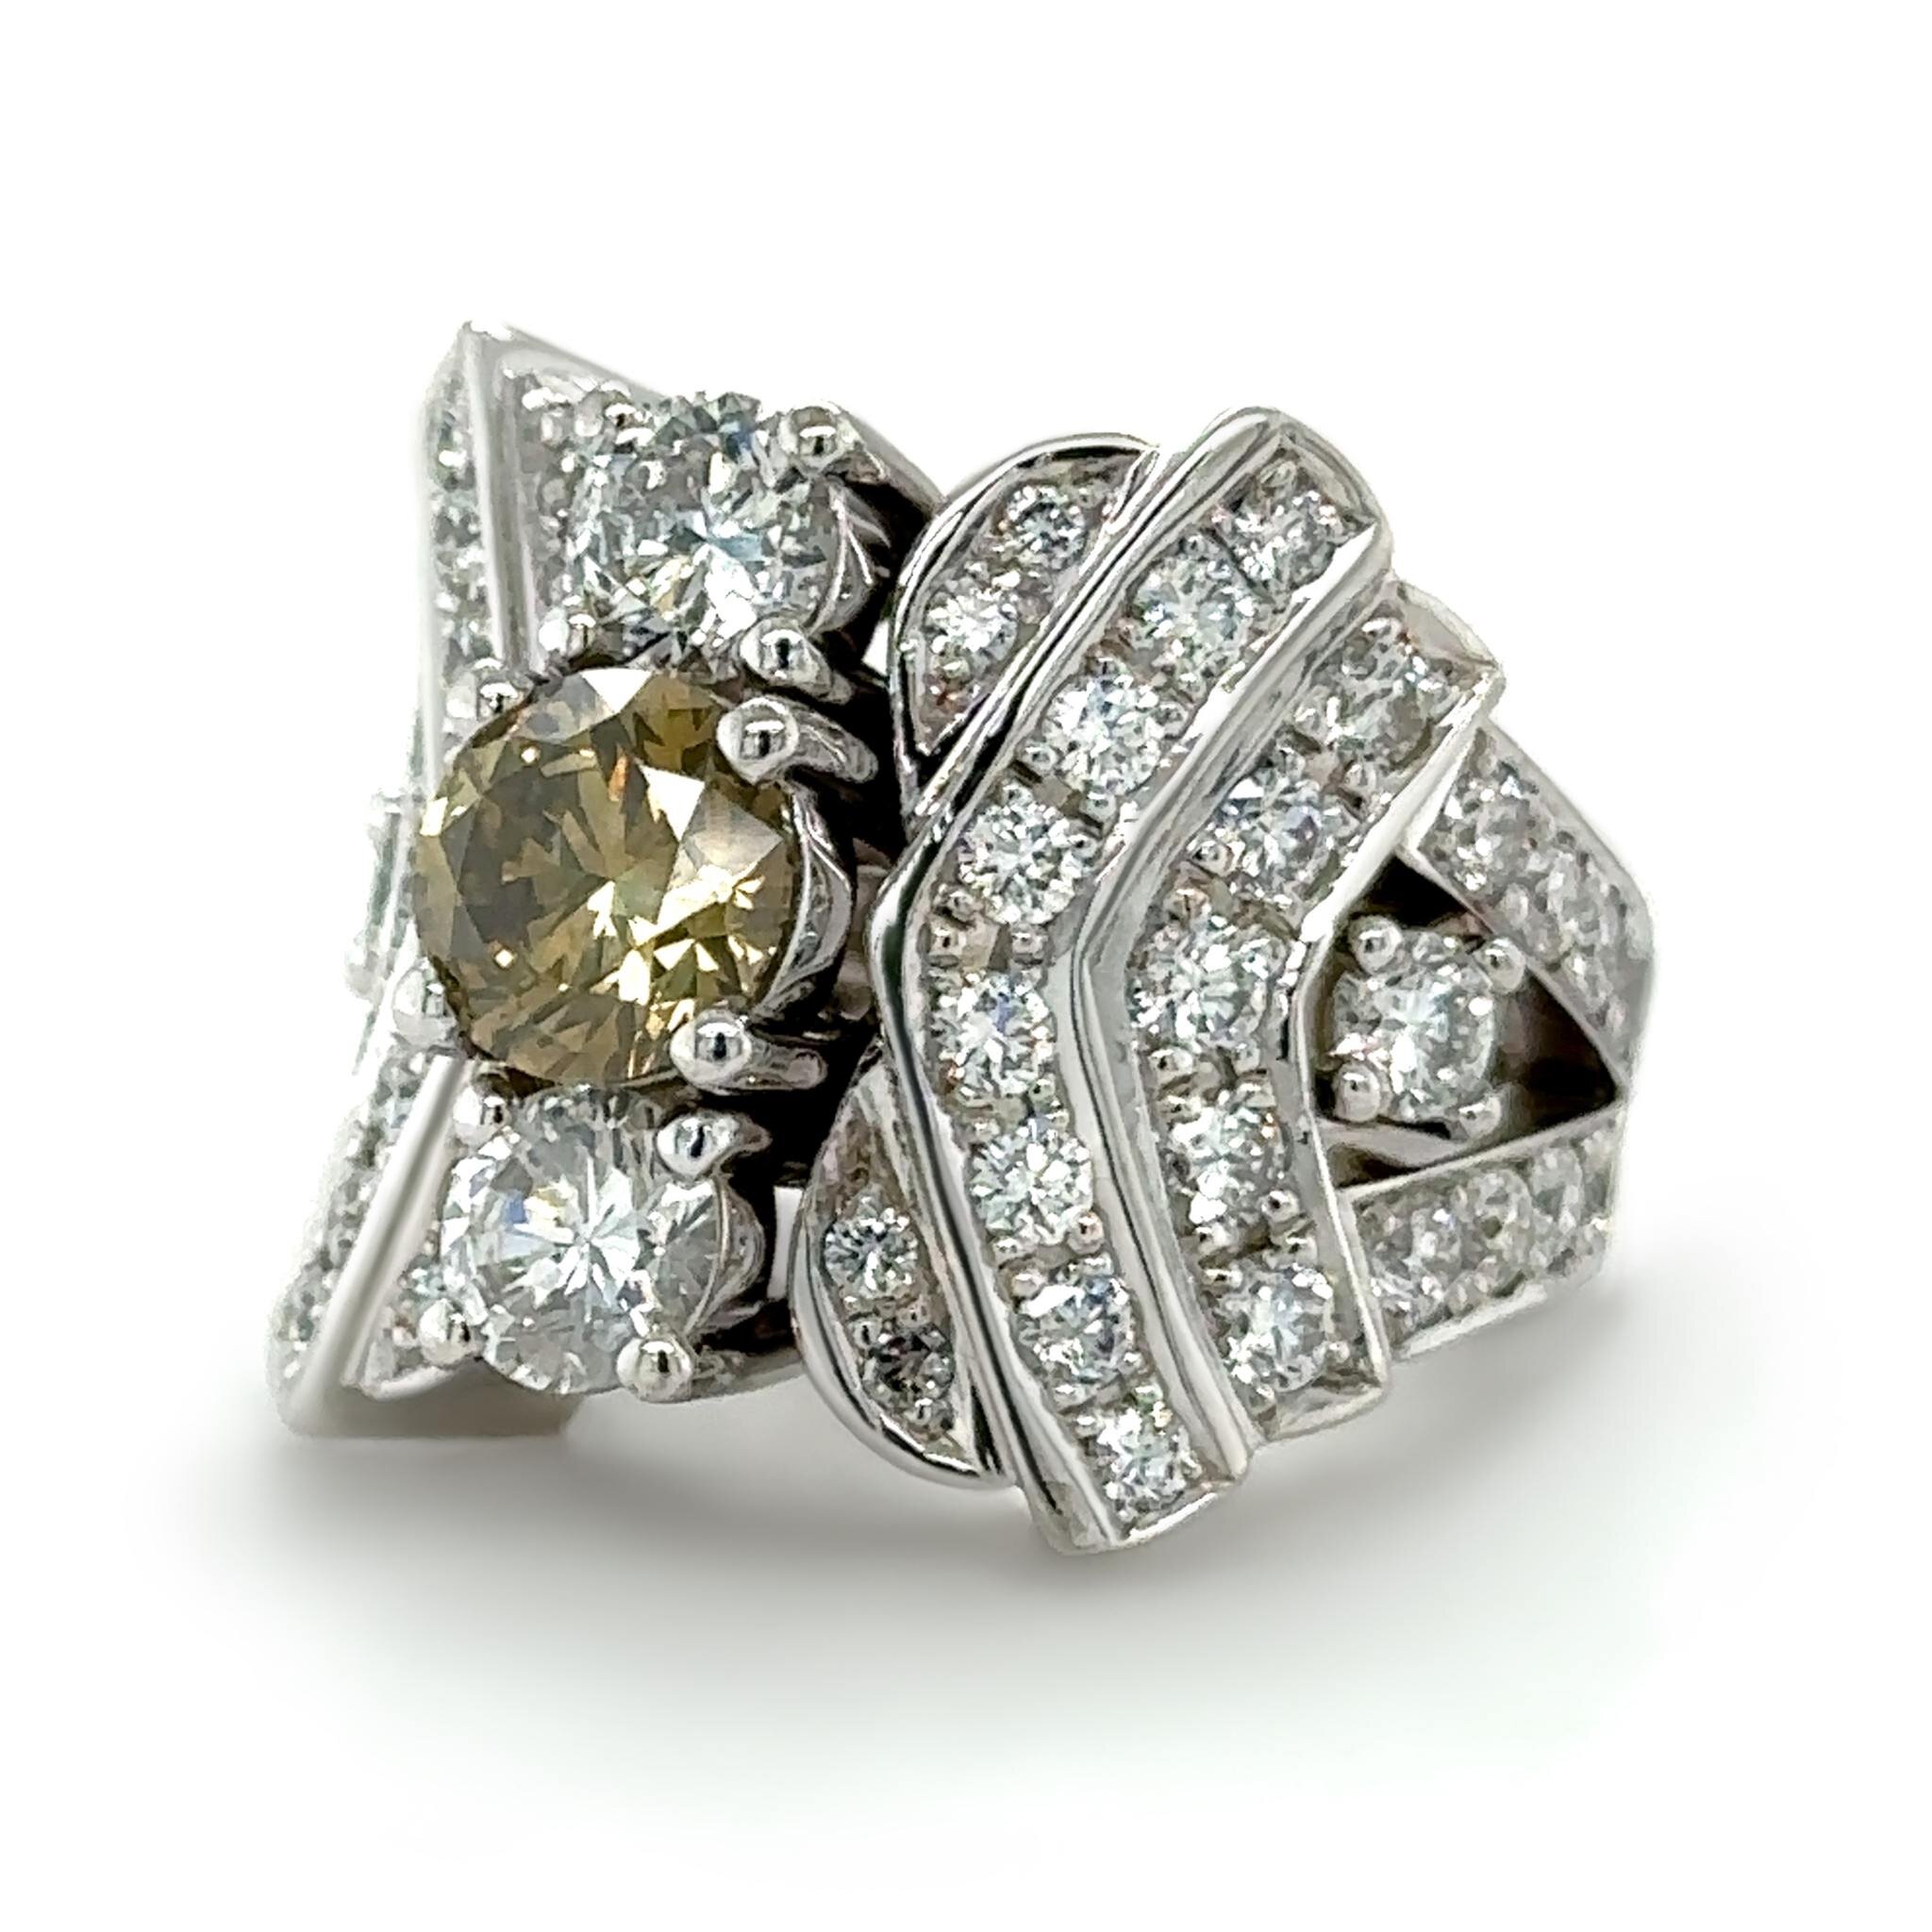 This amazing white gold ring was created for a customer who had quite a few different rings she collected over the years and wanted them made into one ring. With lots of stones to work with, including the beautiful yellow diamond in the center, we ca